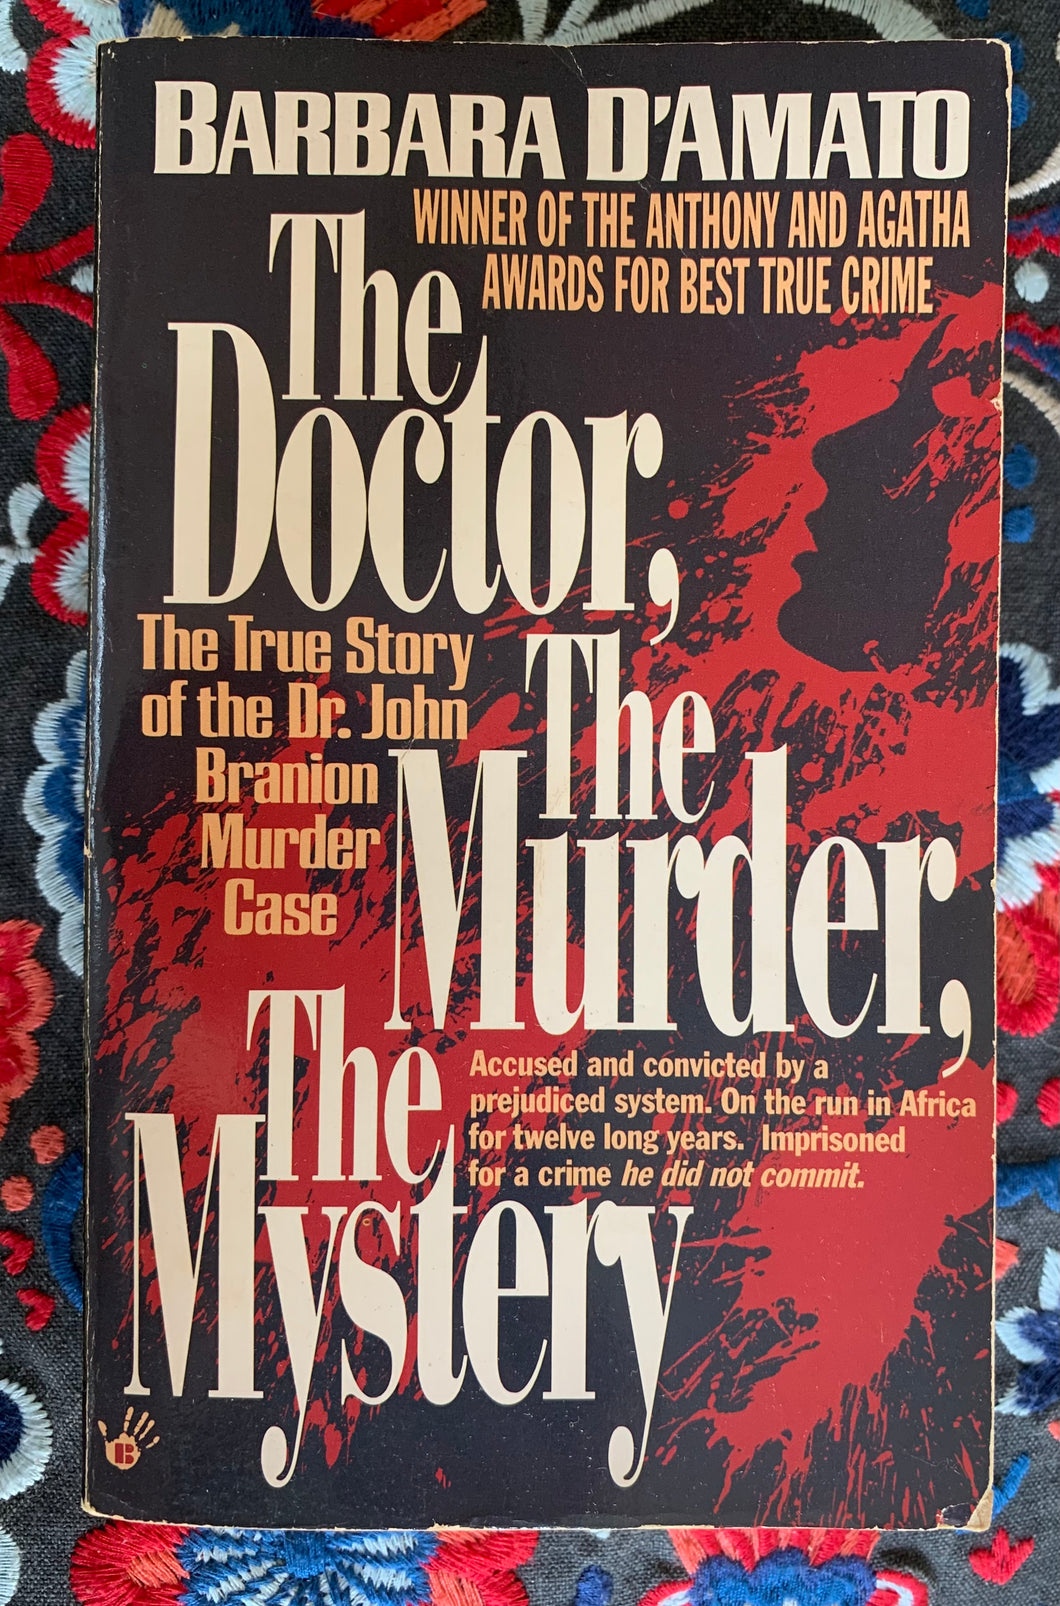 The Doctor, The Murder, The Mystery: The True Story of the Dr. John Branion Murder Case